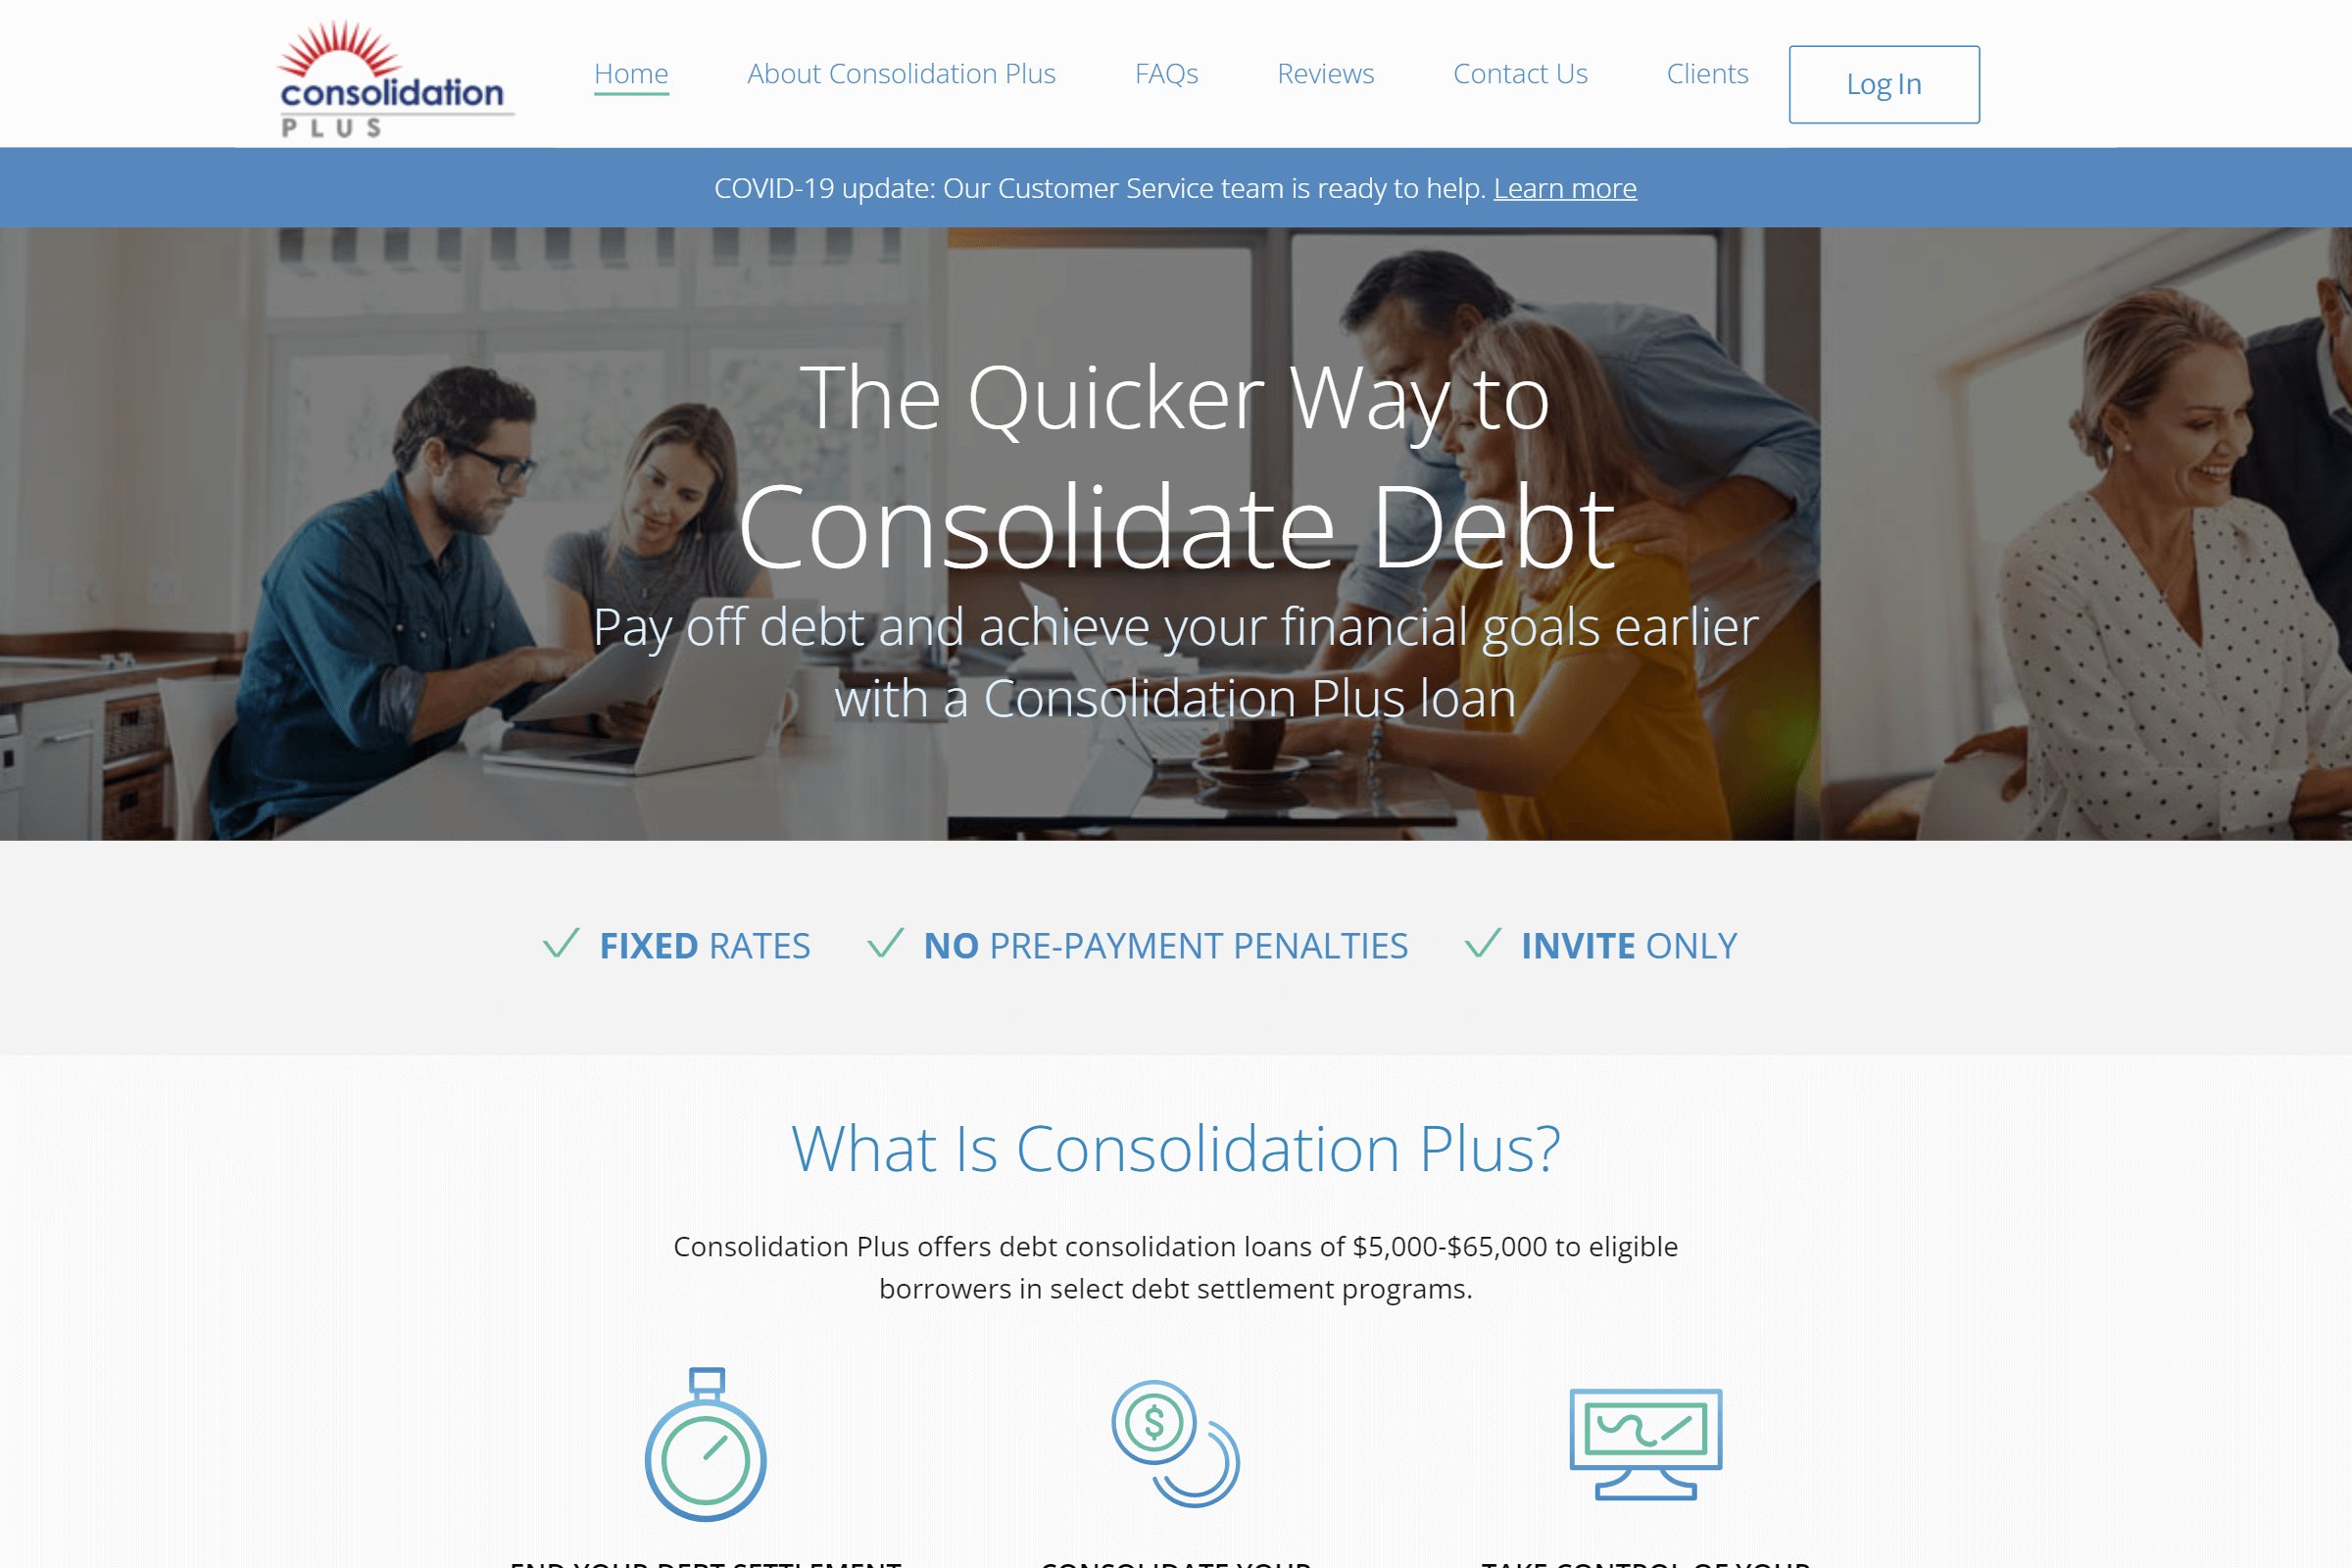 Consolidation Plus on ReadSomeReviews